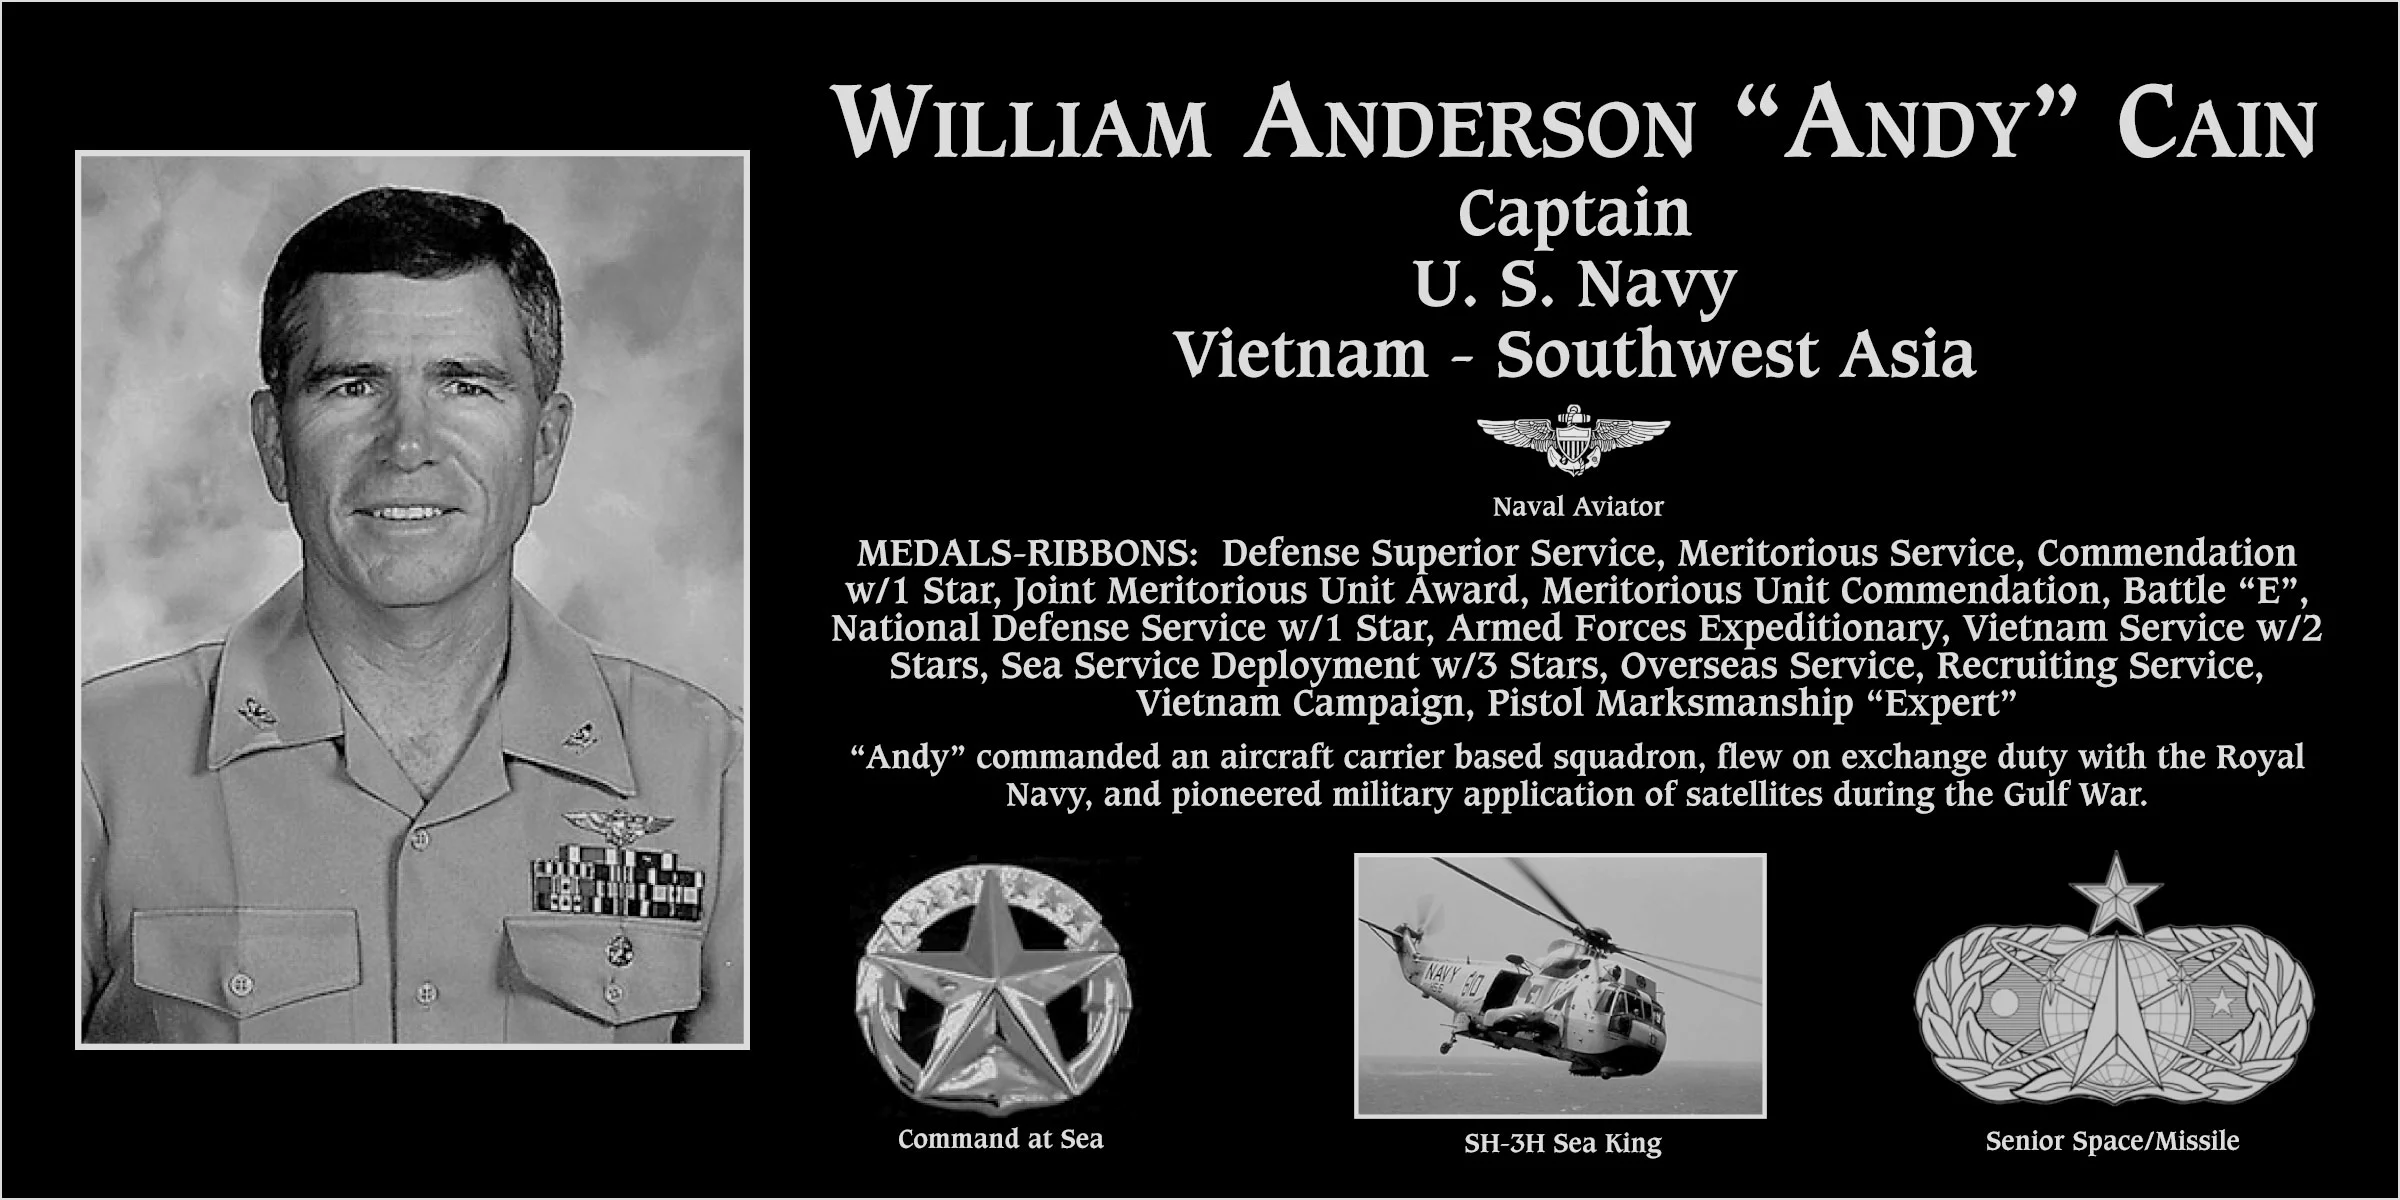 William Anderson “Andy” Cain